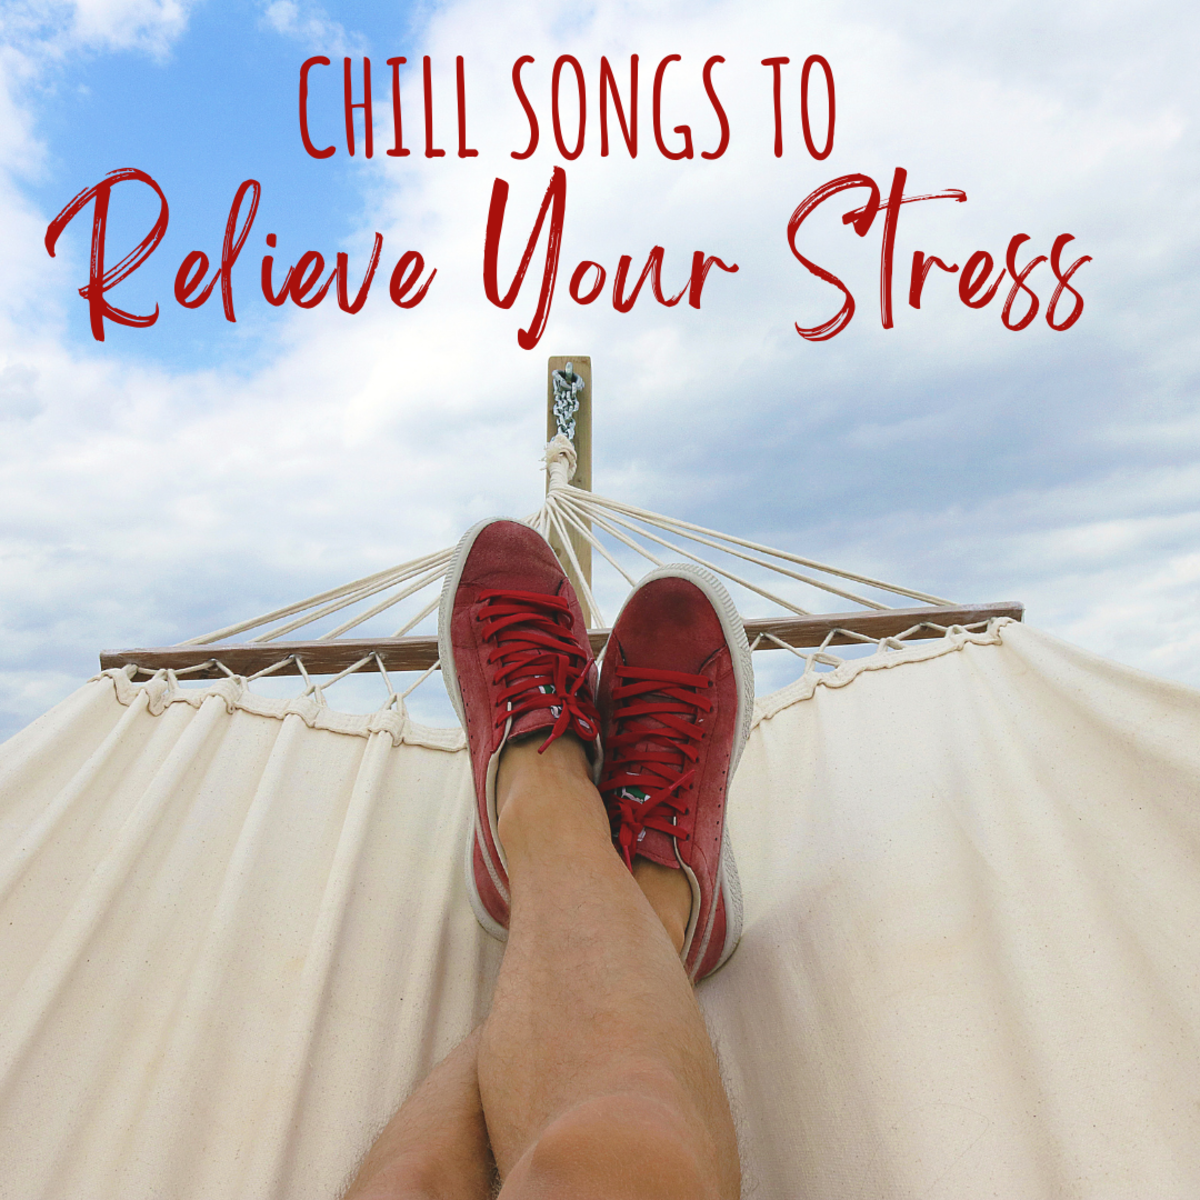 Relax and unwind with these calming, relaxing tracks!